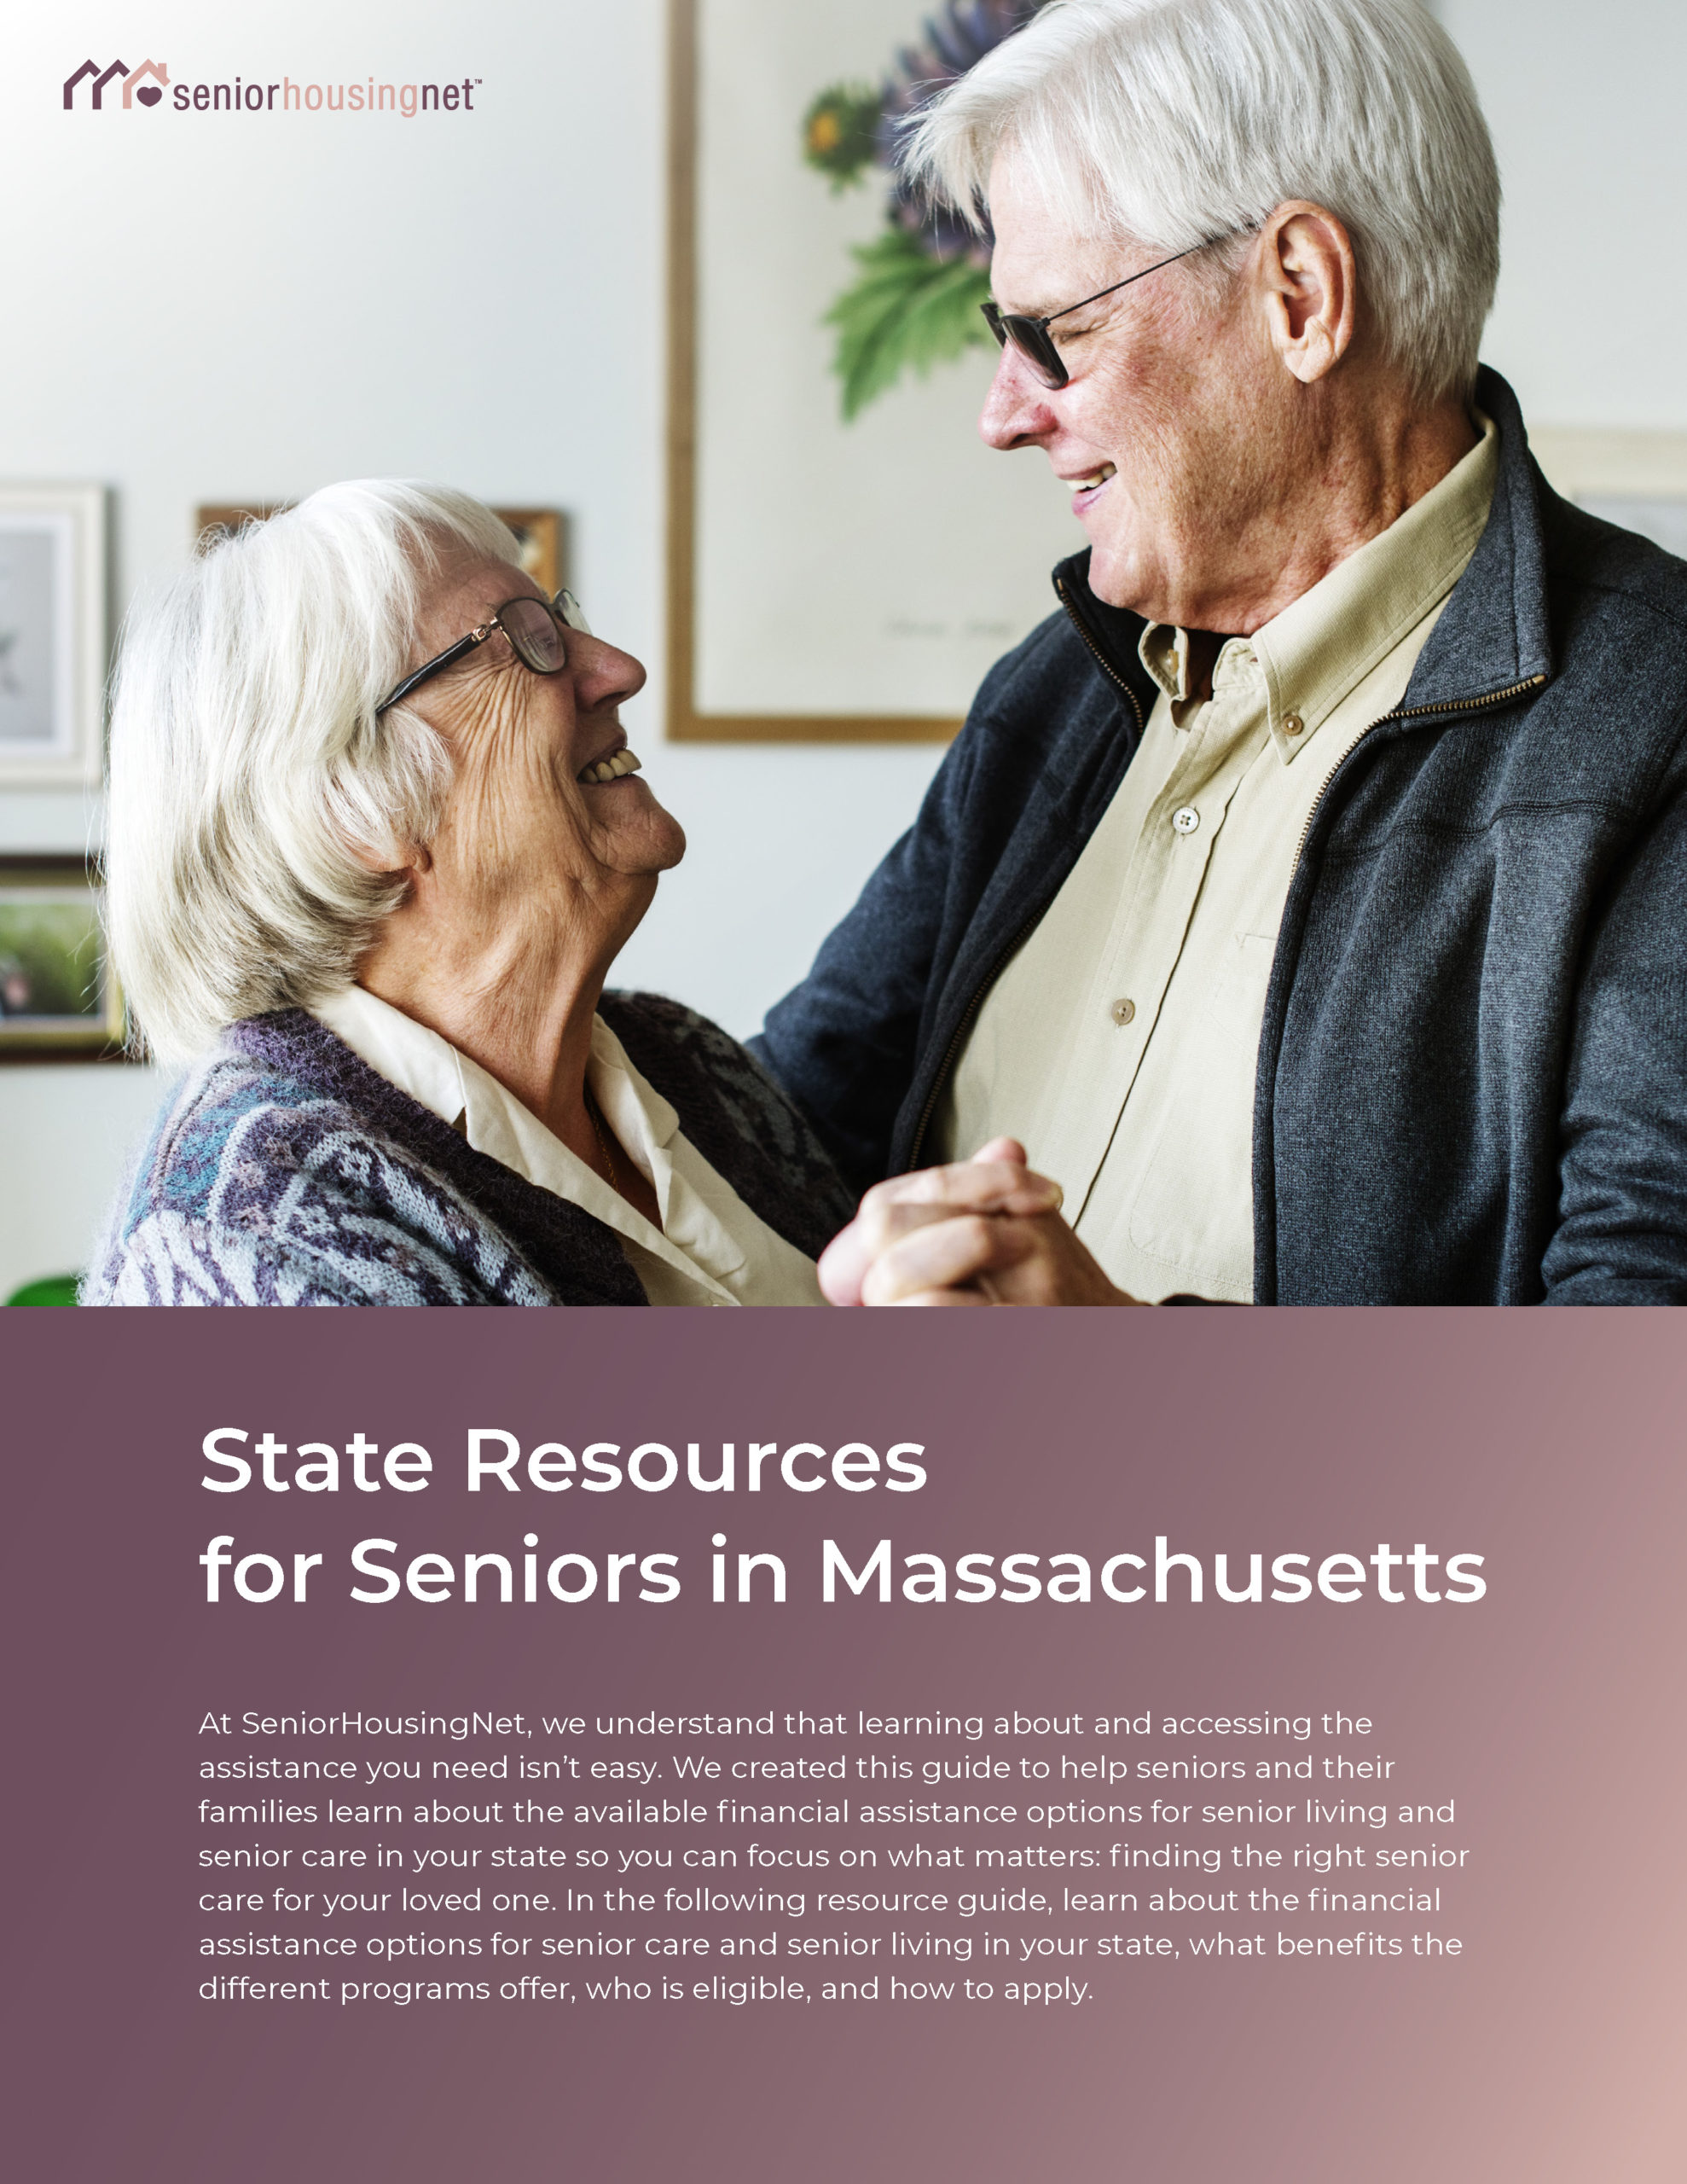 State Resources for Seniors in Massachusetts